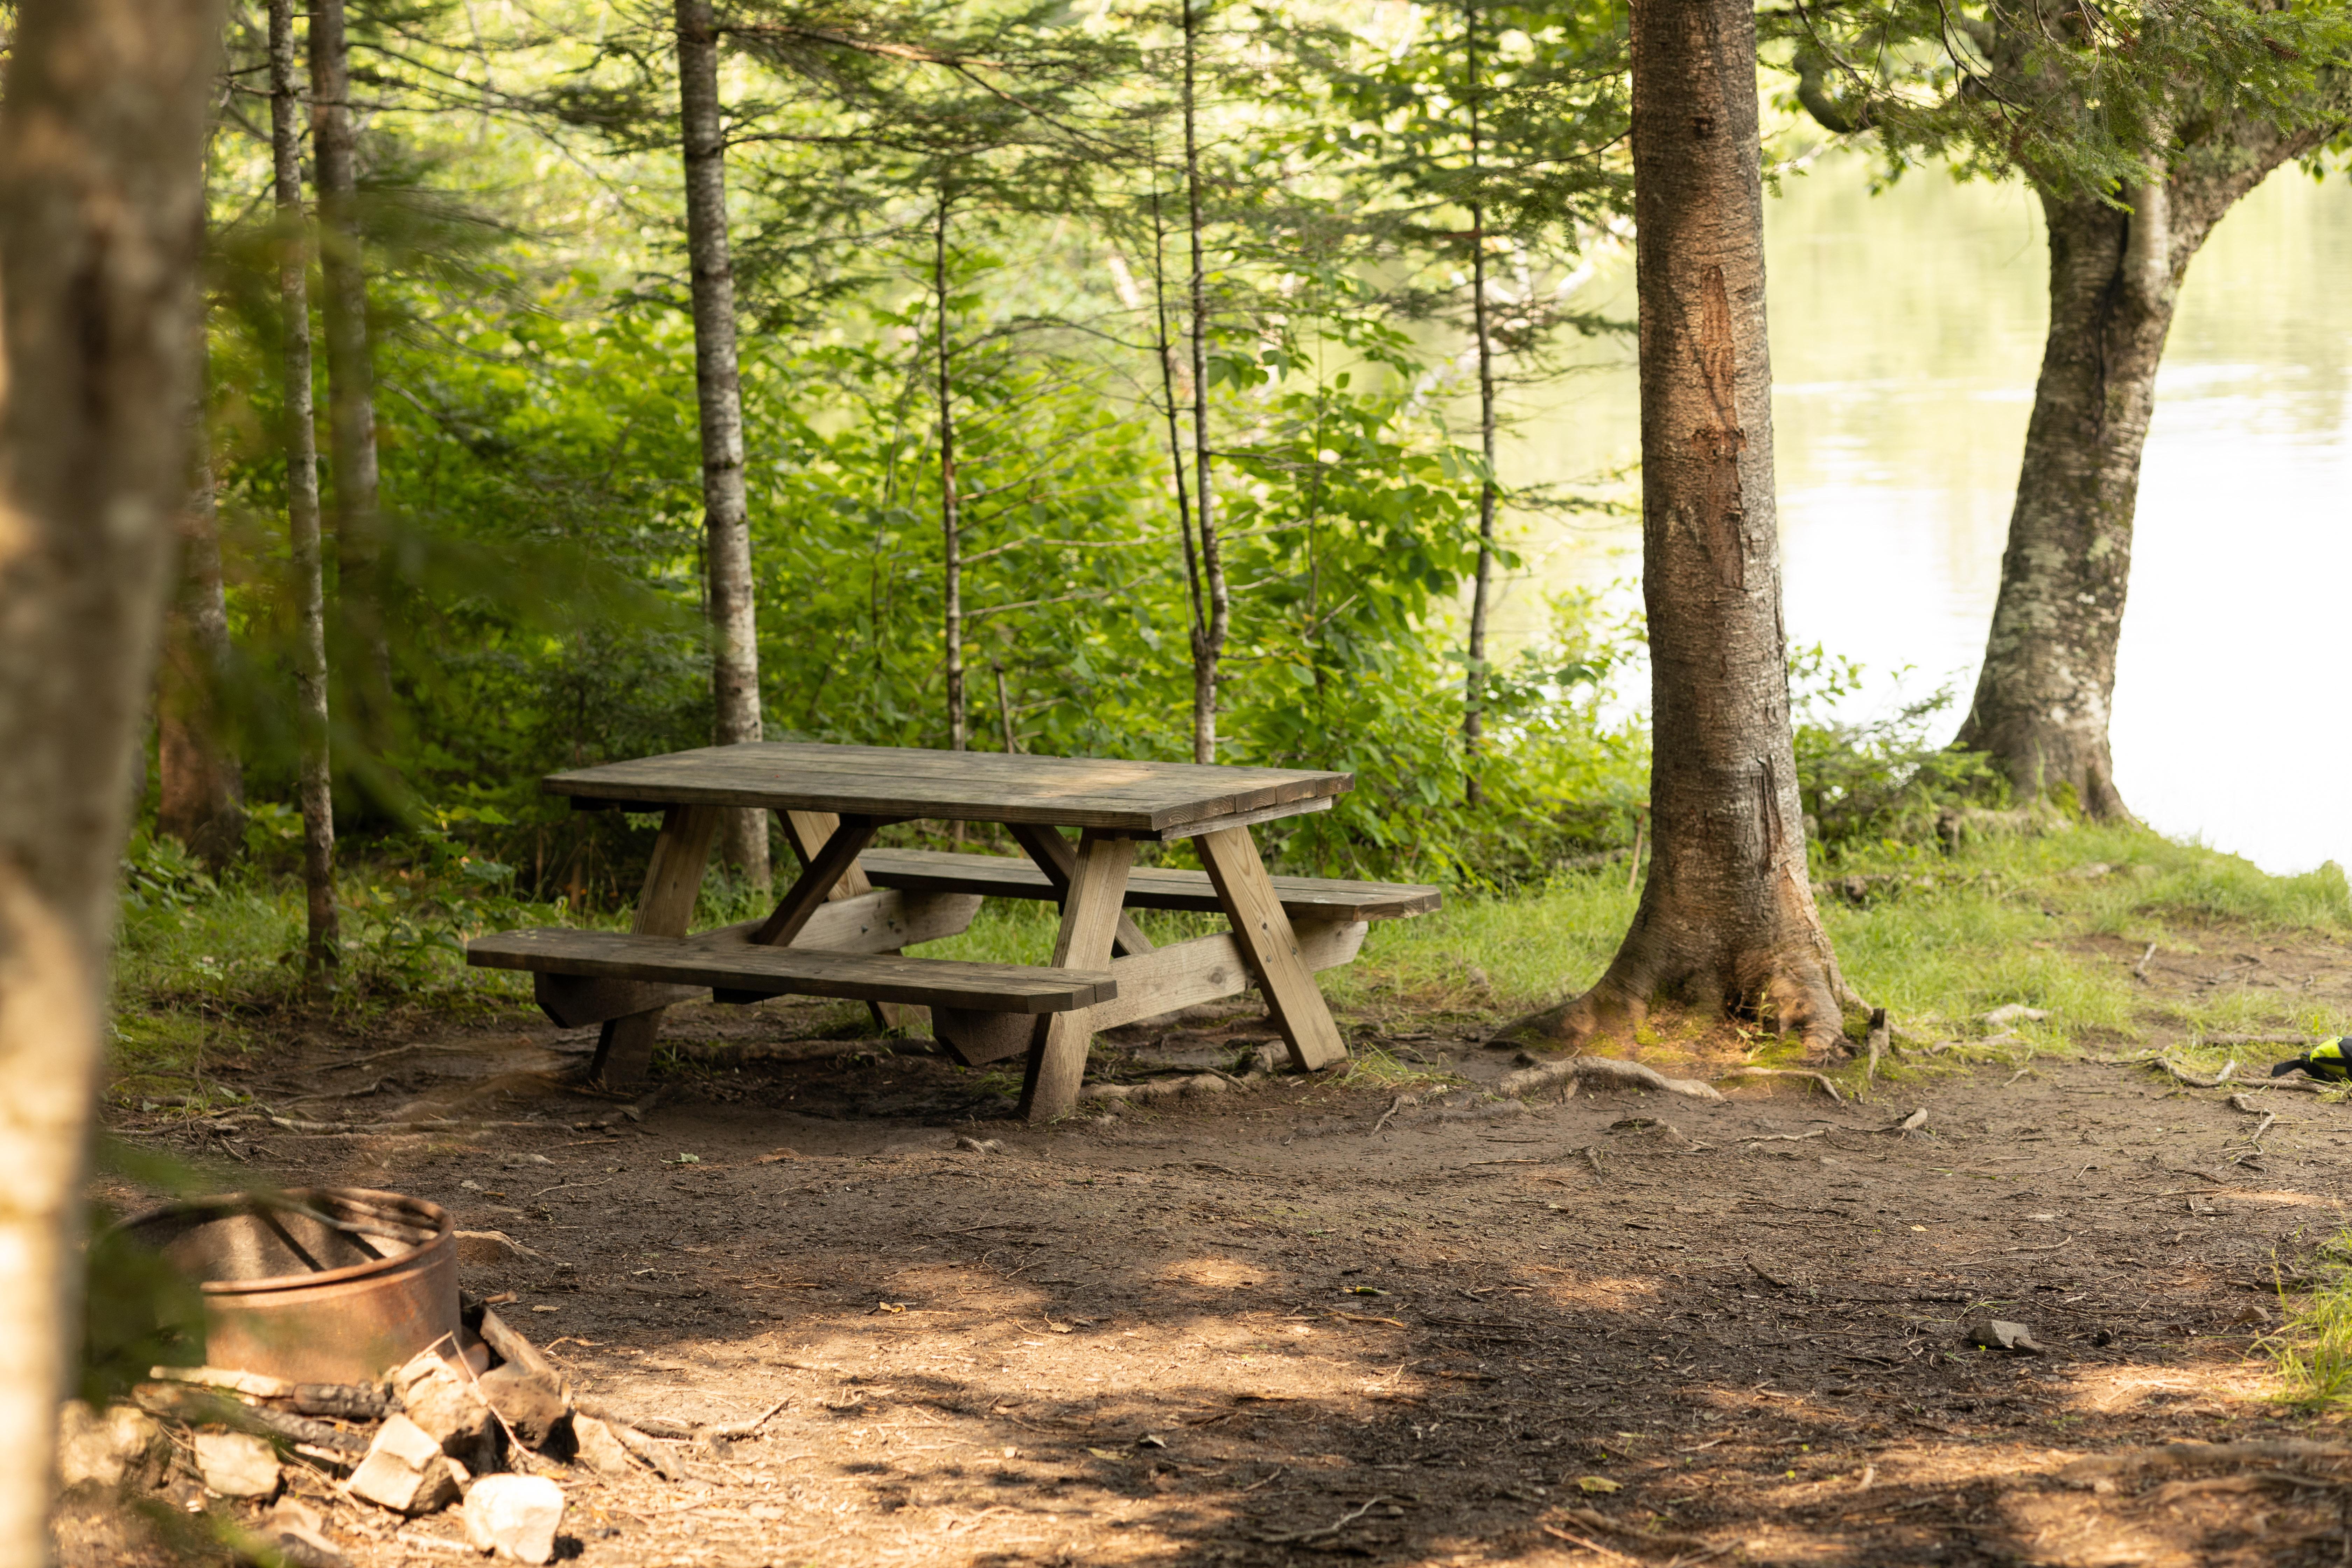 A picnic table in a small clearing surrounded by trees by a river